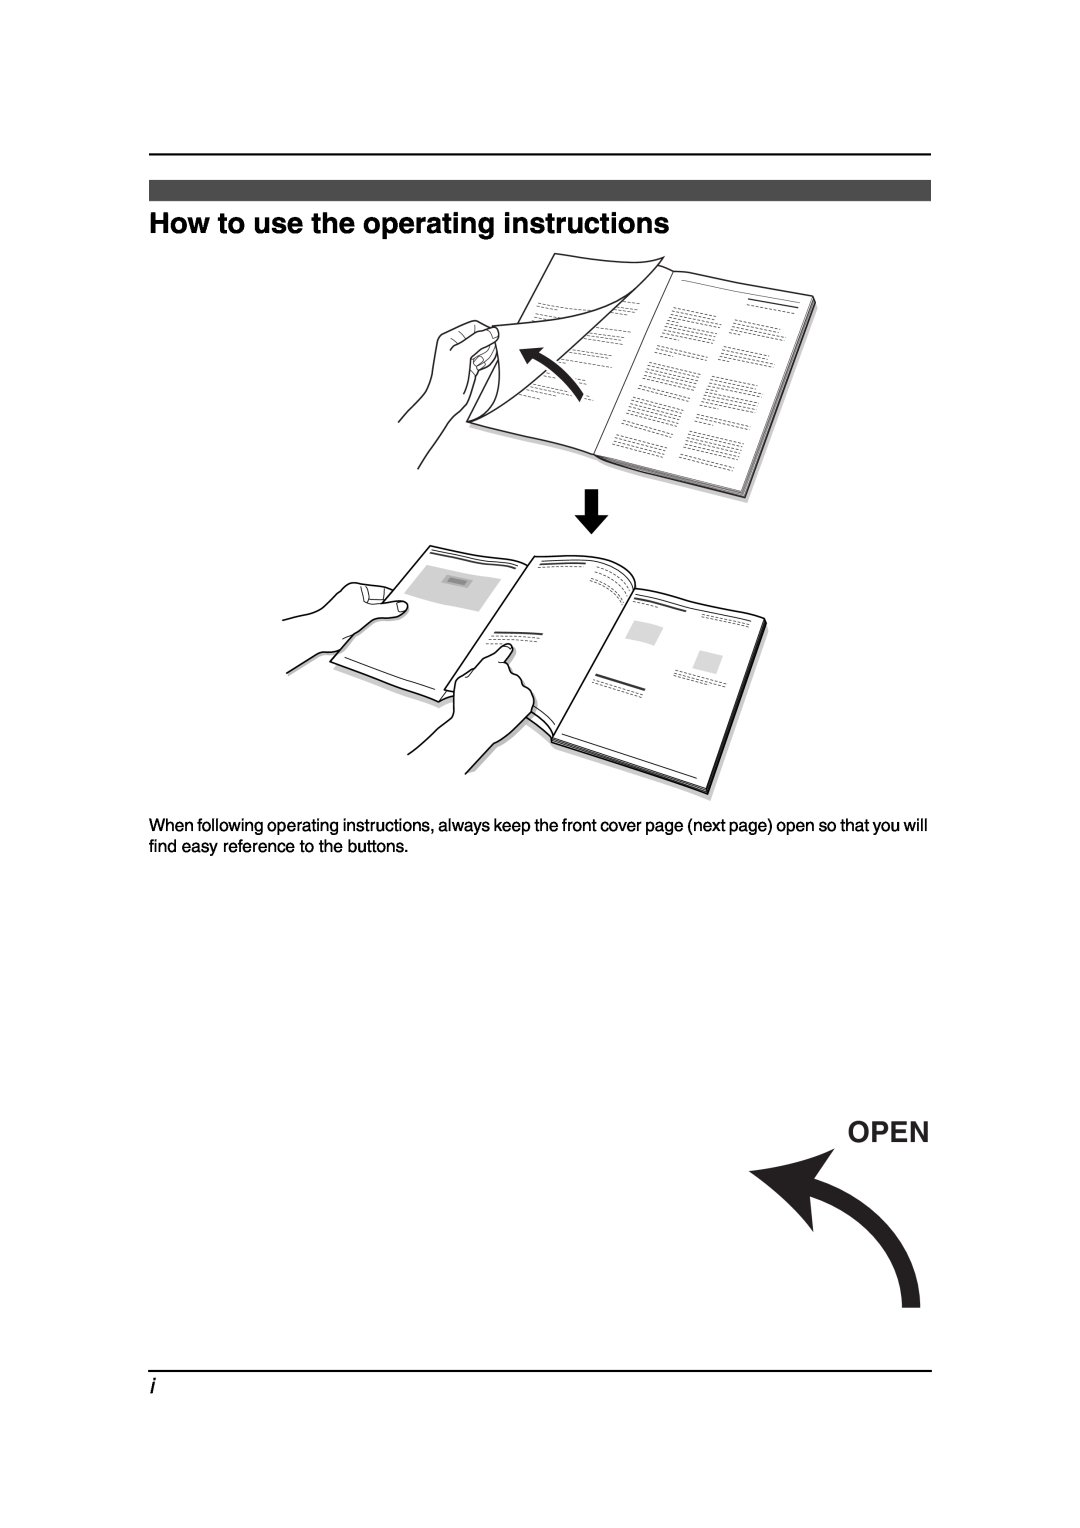 Panasonic KX-FL511AL manual How to use the operating instructions, Open 